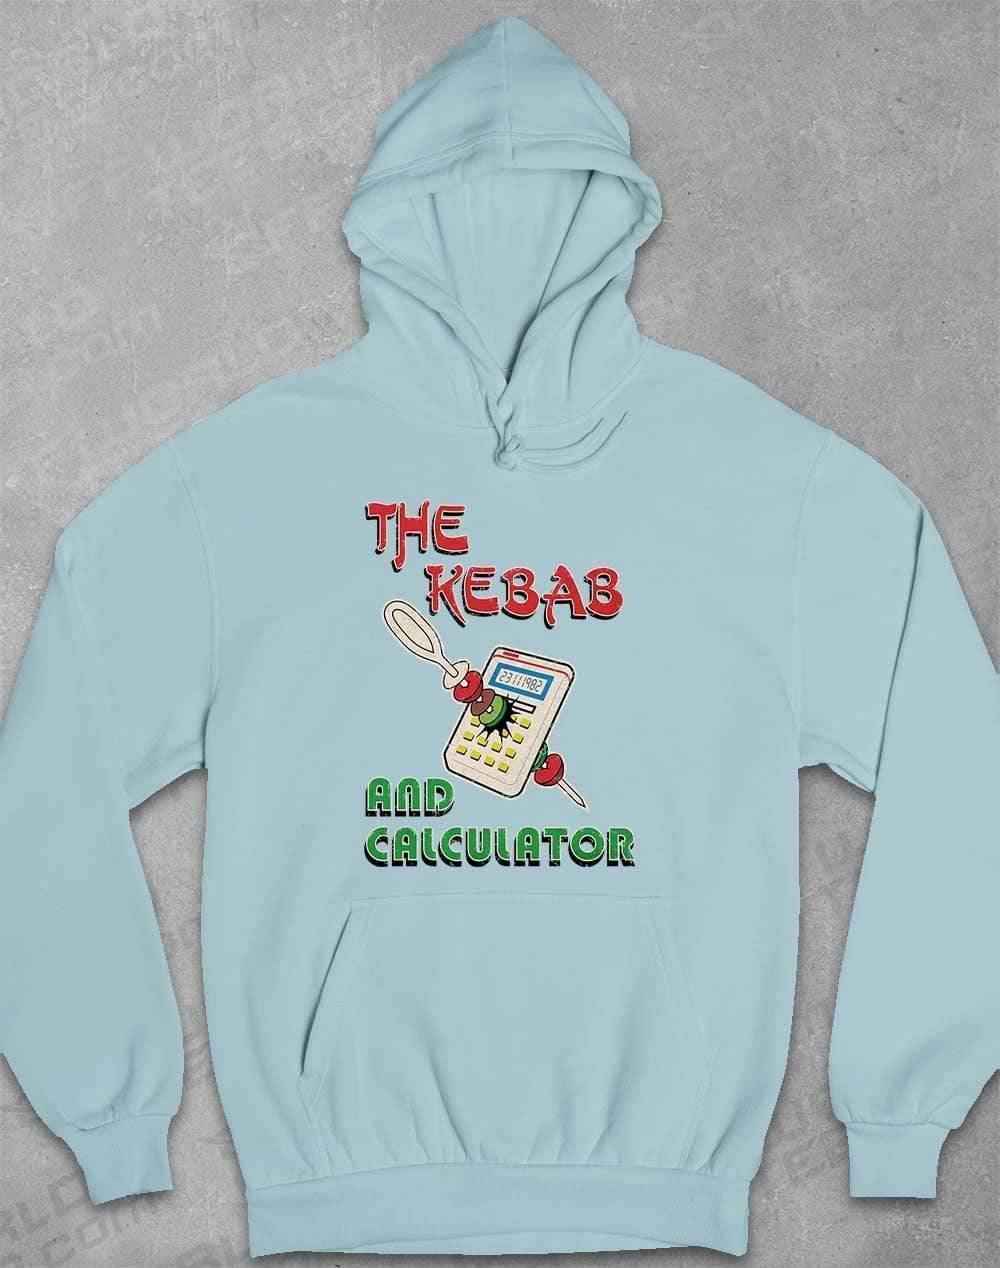 The Kebab and Calculator 1982 Hoodie XS / Sky Blue  - Off World Tees